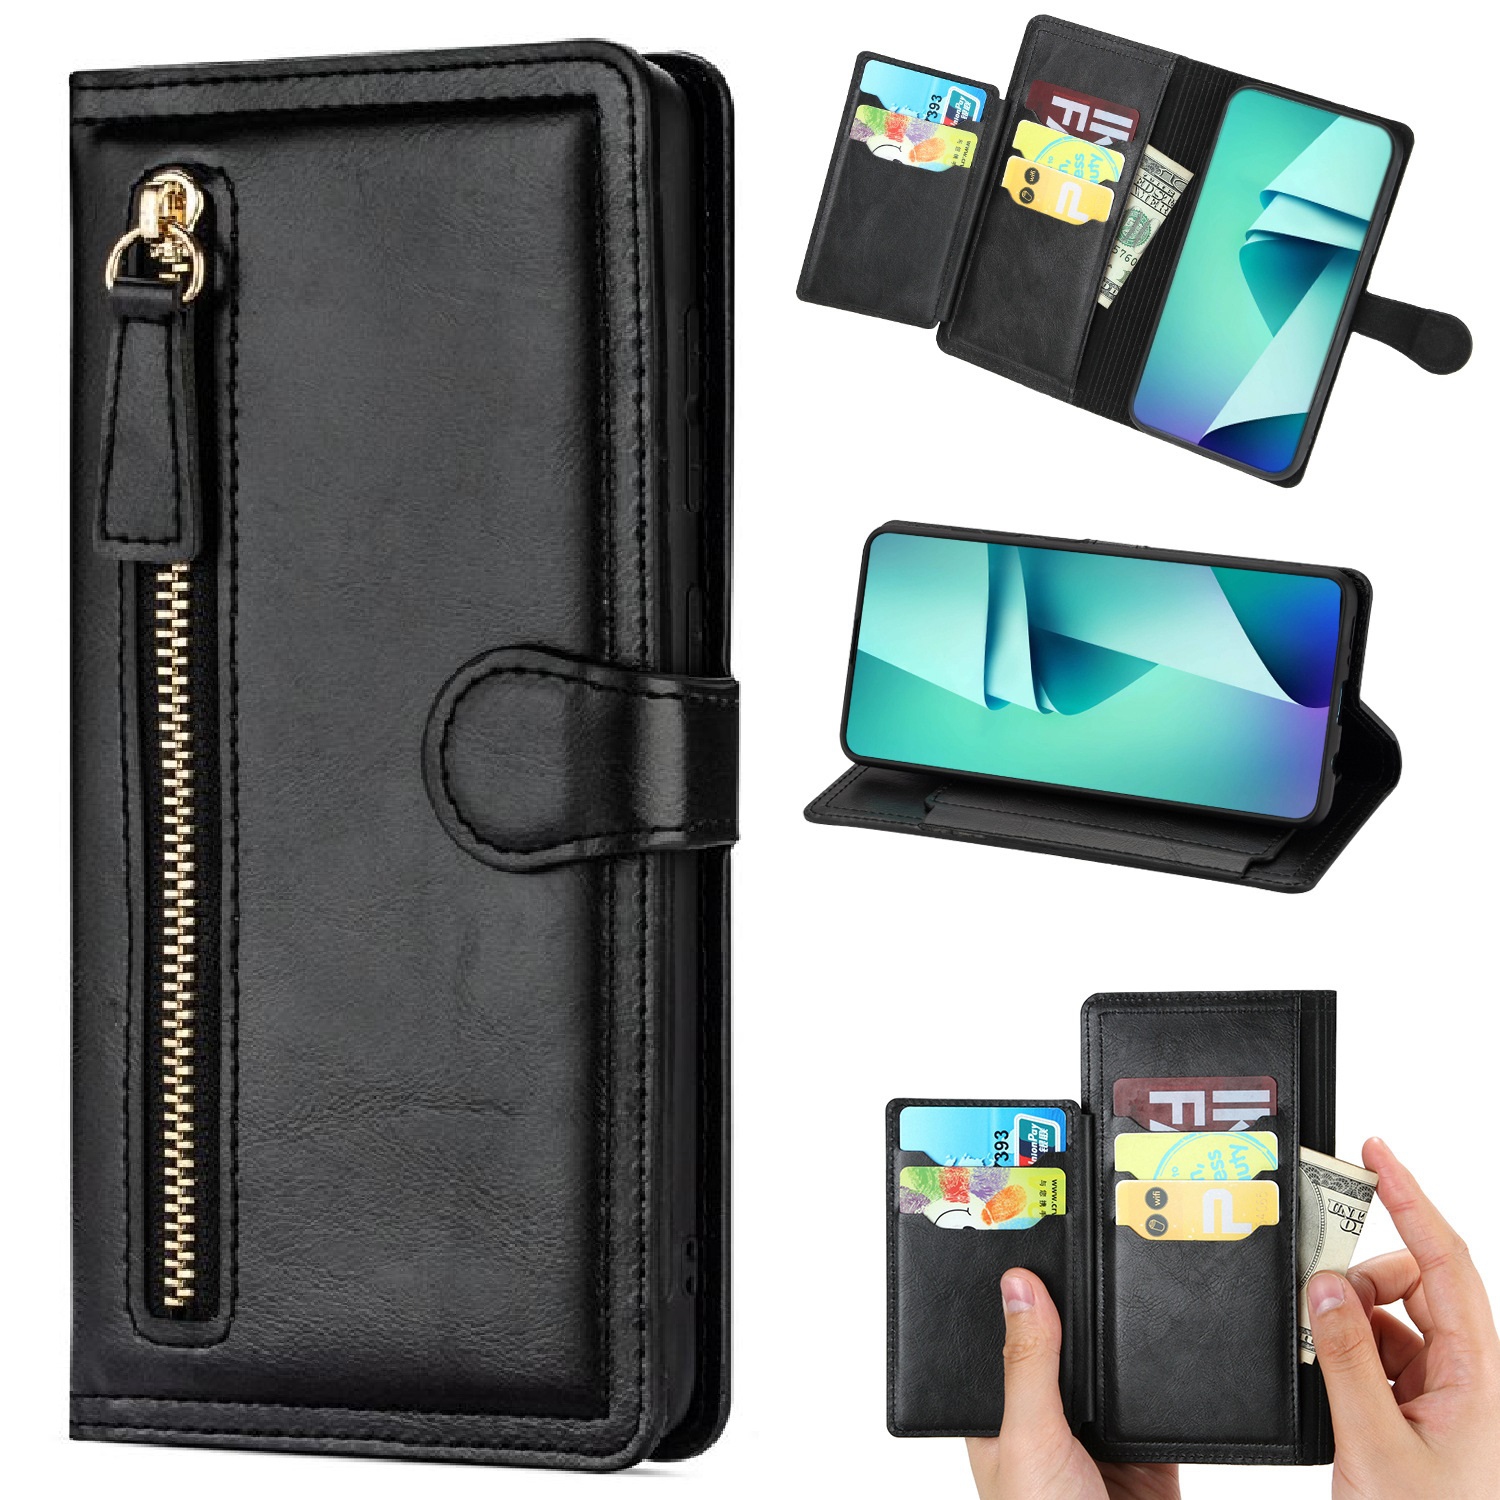 PIERO Leather Zipper Wallet Case Flip Card Holder Stand Phone Cover Premium Leather Flip Cover for Samsung Galaxy S22 ULTRA -Black (FREE SHIPPING)